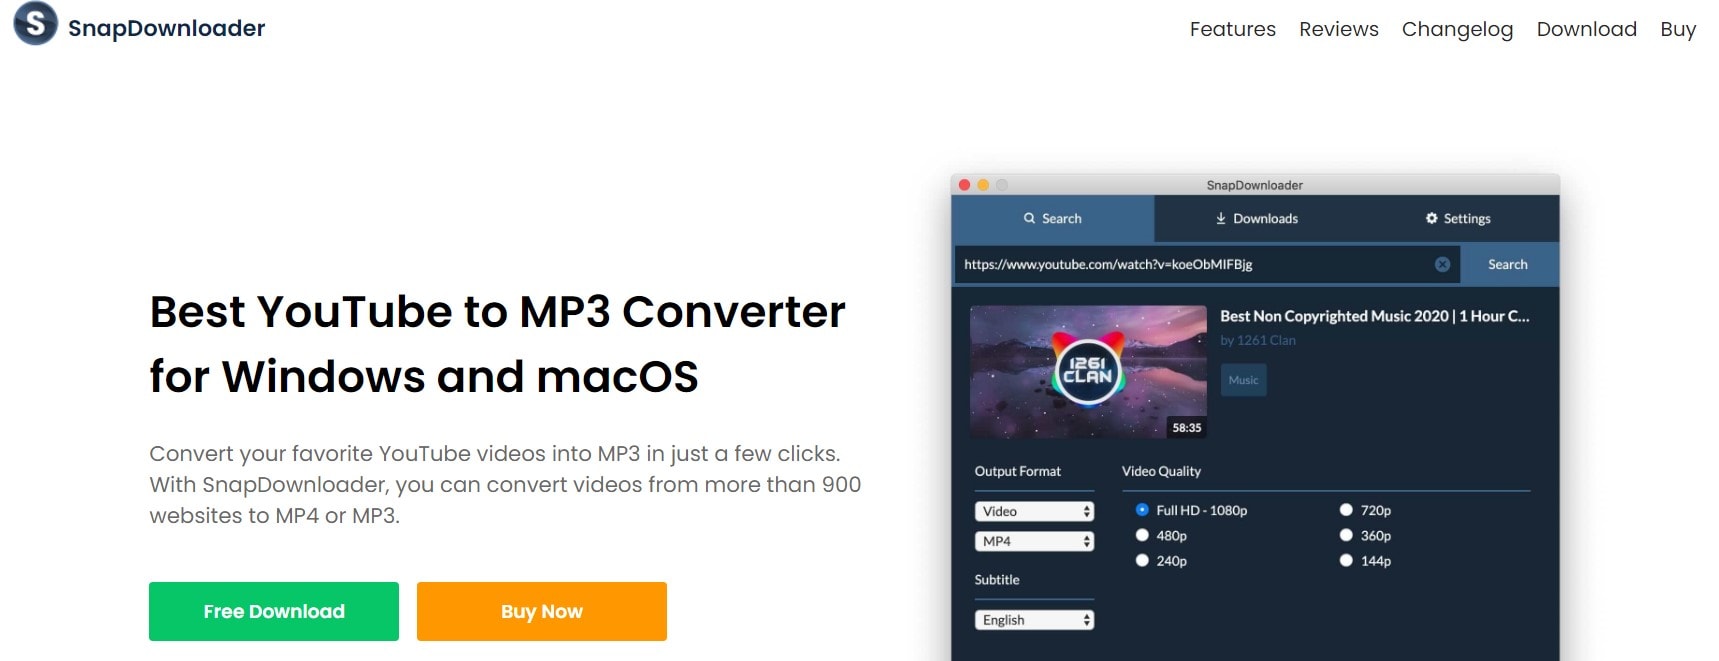 SnapDownloader YouTube To MP3 Converter